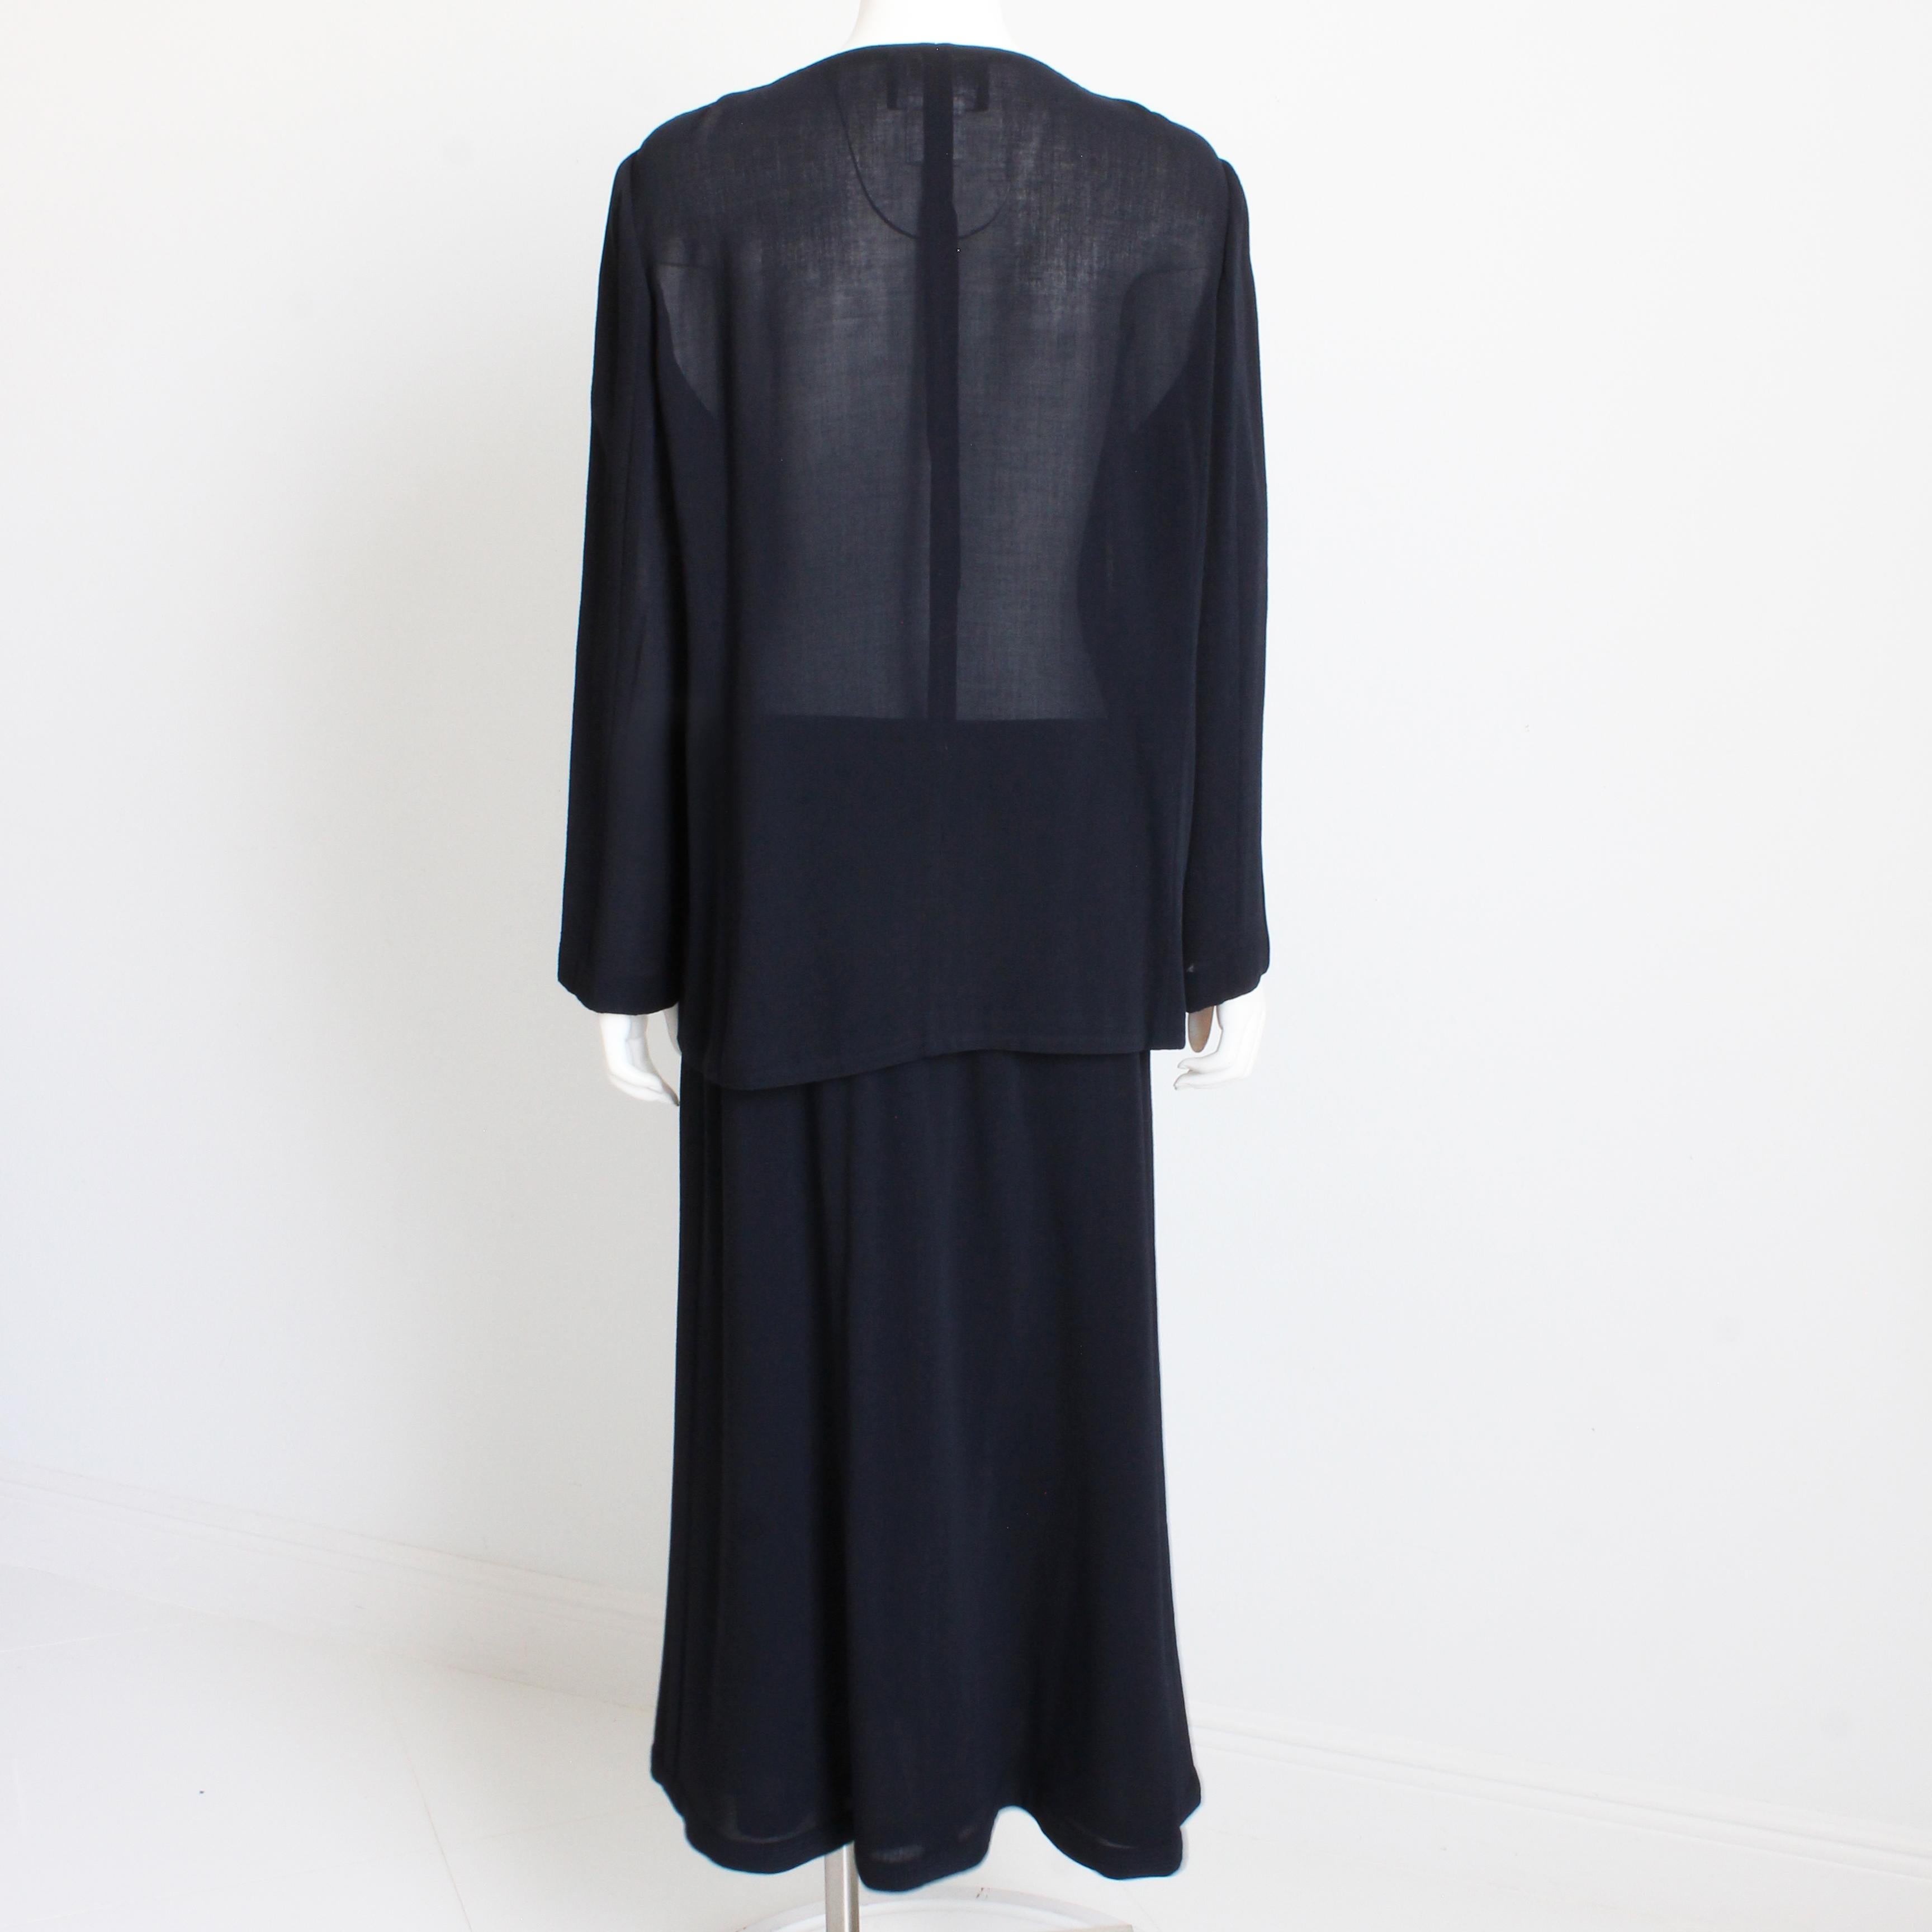 Chanel Jacket + Skirt Suit 2pc Sheer Wool Crepe Button Front Navy Blue 99P Sz 44 For Sale 4